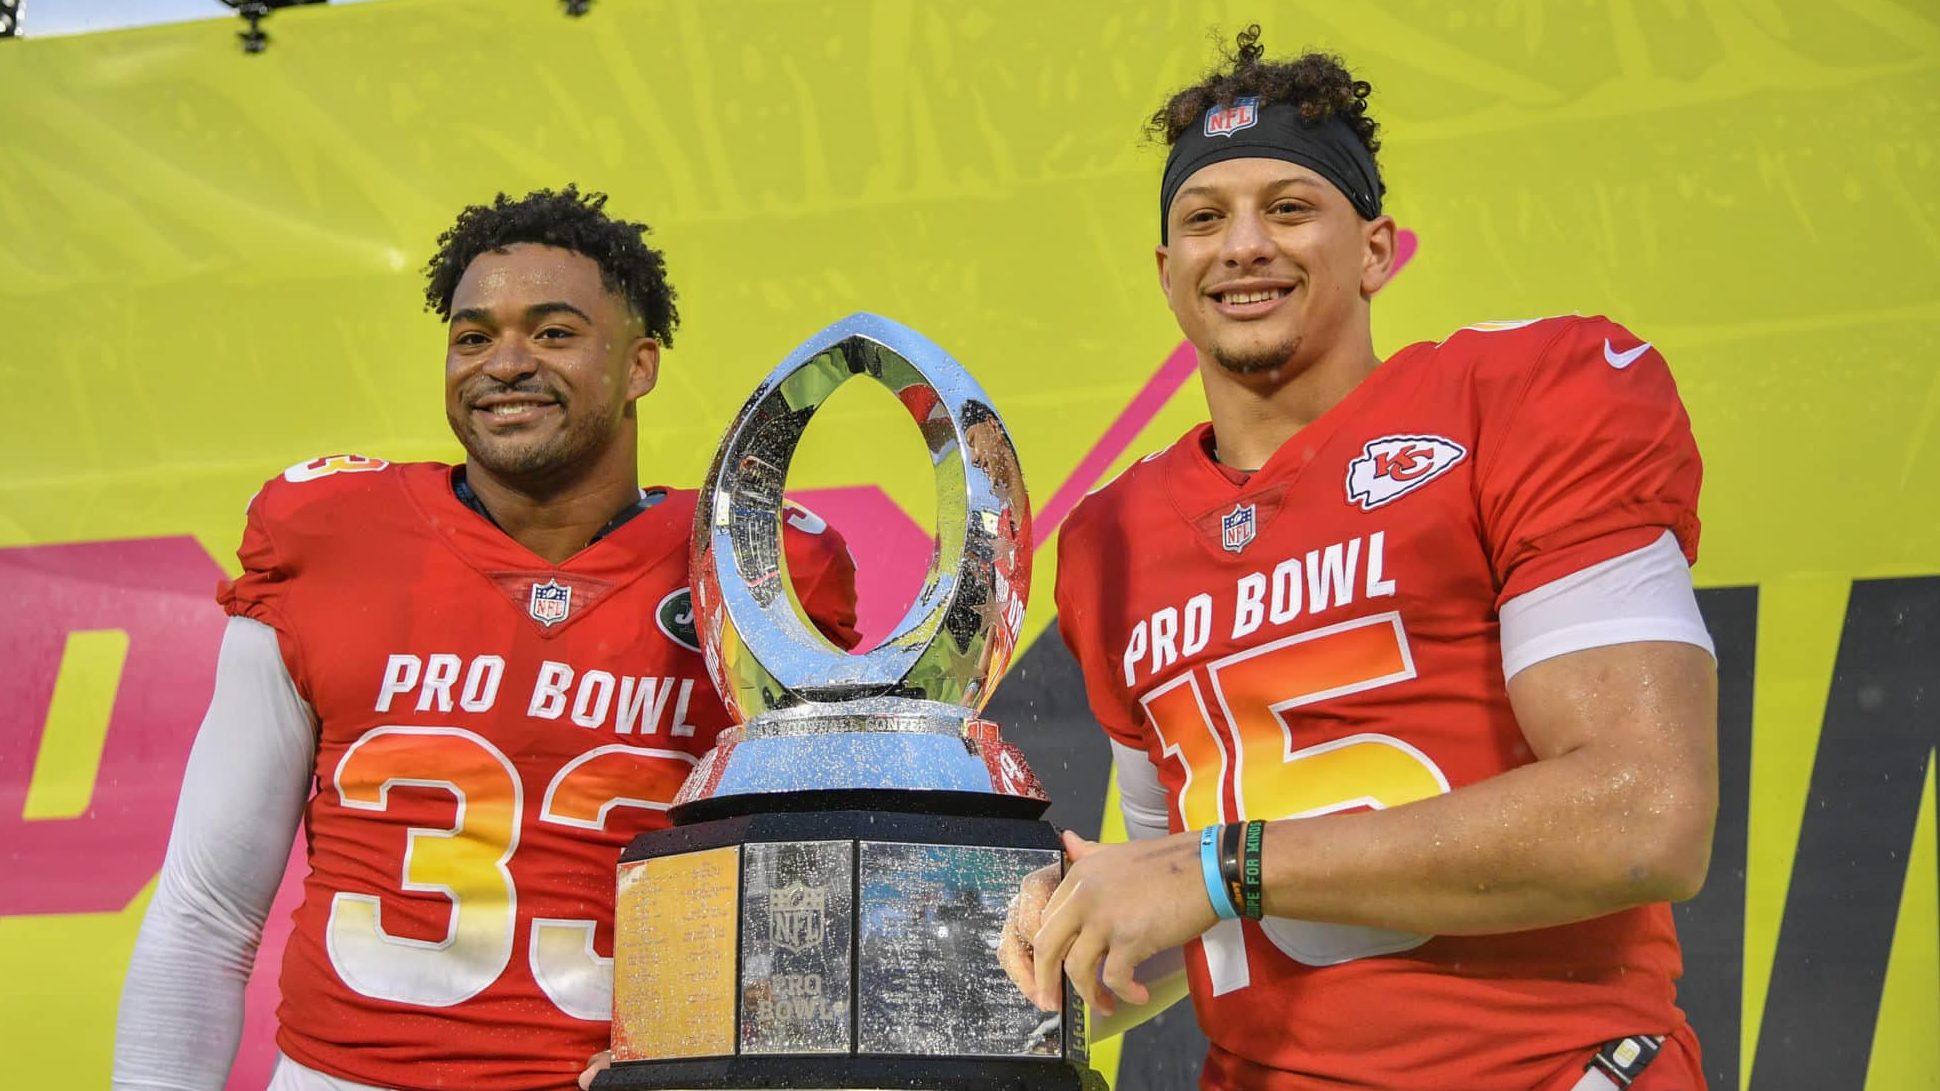 ORLANDO, FL - JANUARY 27: Jamal Adams #33 of the New York Jets and Patrick Mahomes #15 of the Kansas City Chiefs are names Co-MVP's after the 2019 NFL Pro Bowl at Camping World Stadium on January 27, 2019 in Orlando, Florida.